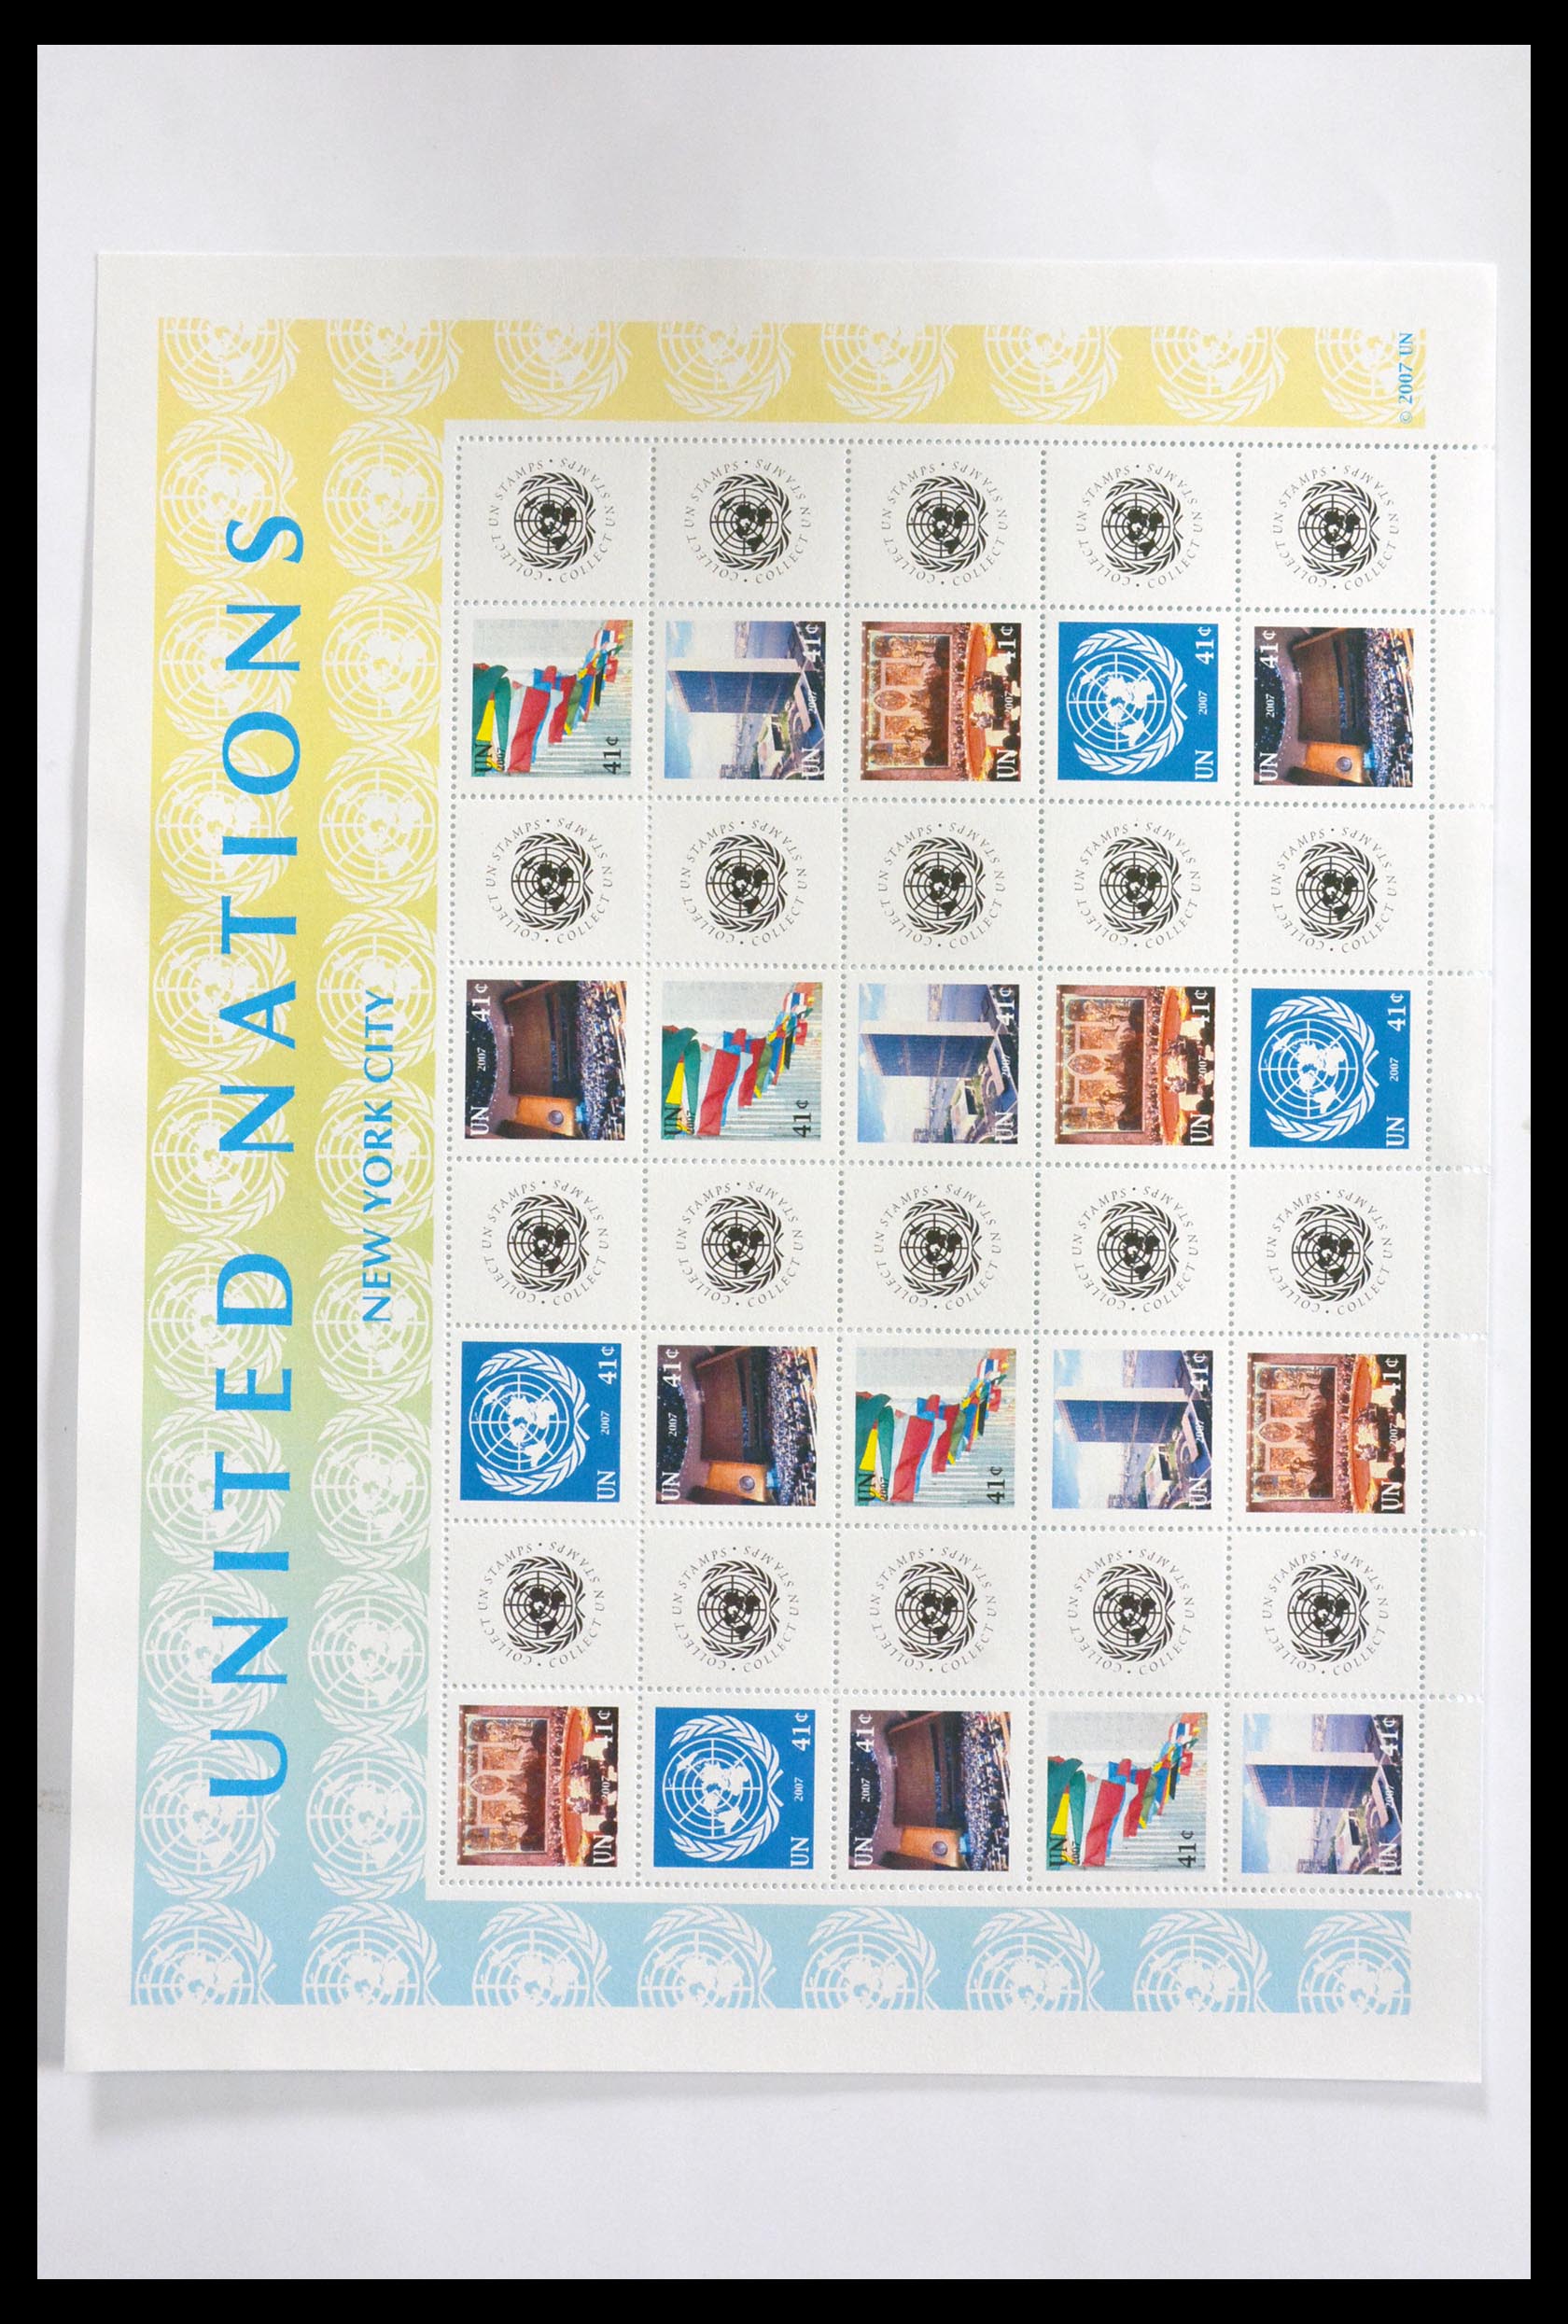 29721 011 - 29721 United Nations personalised sheets 2003-2010.